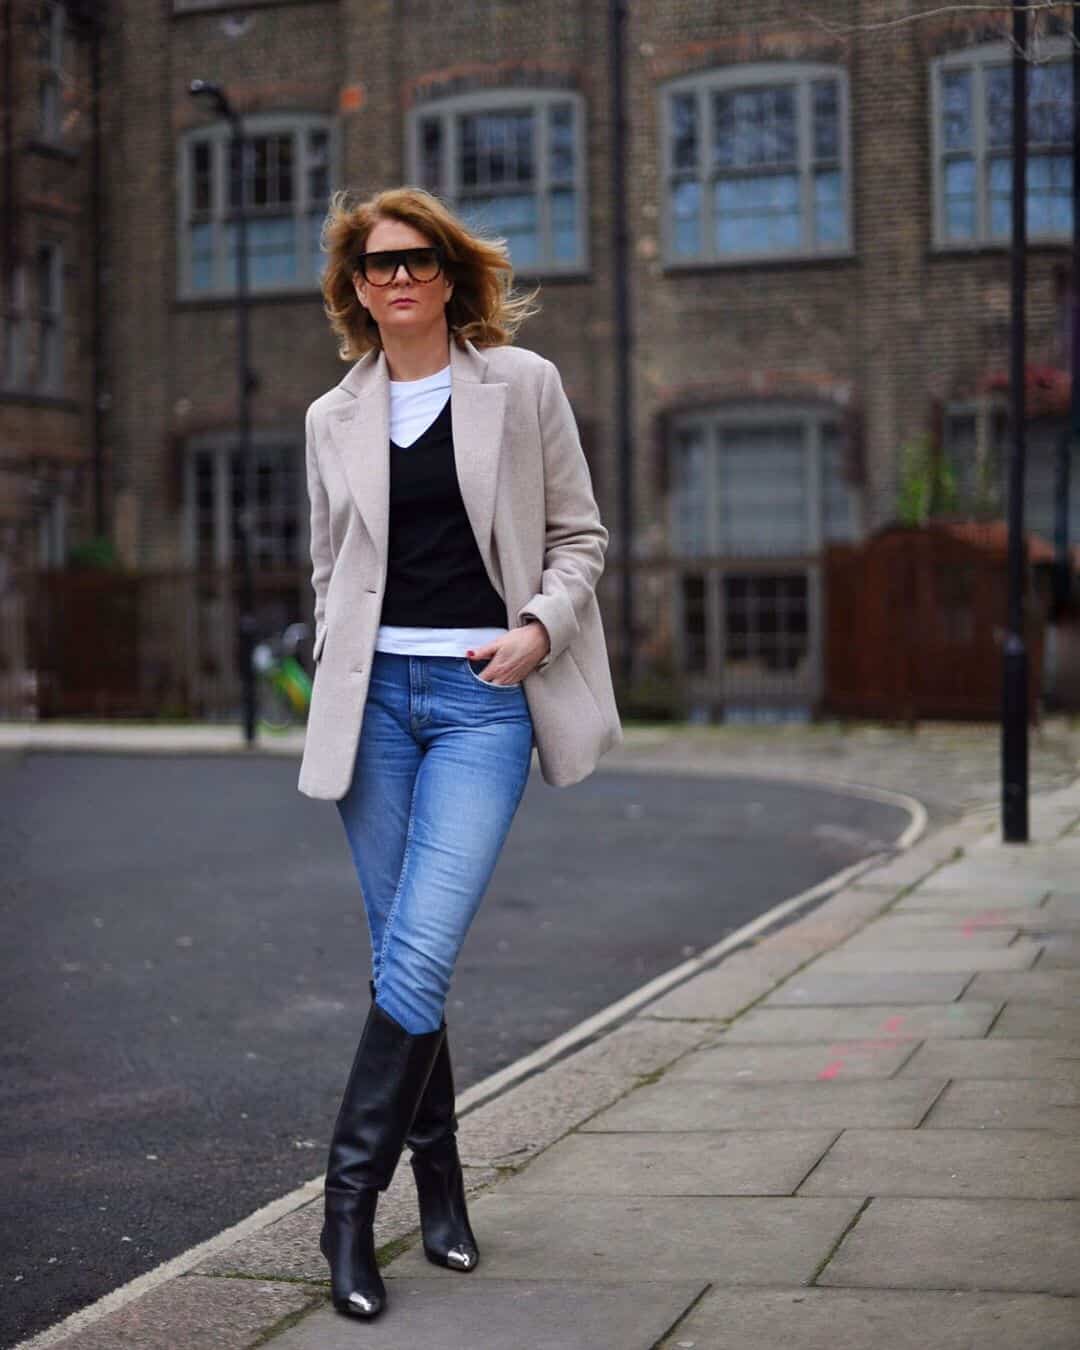 Casual but Stylish Outfits by Suzanne Delahunty